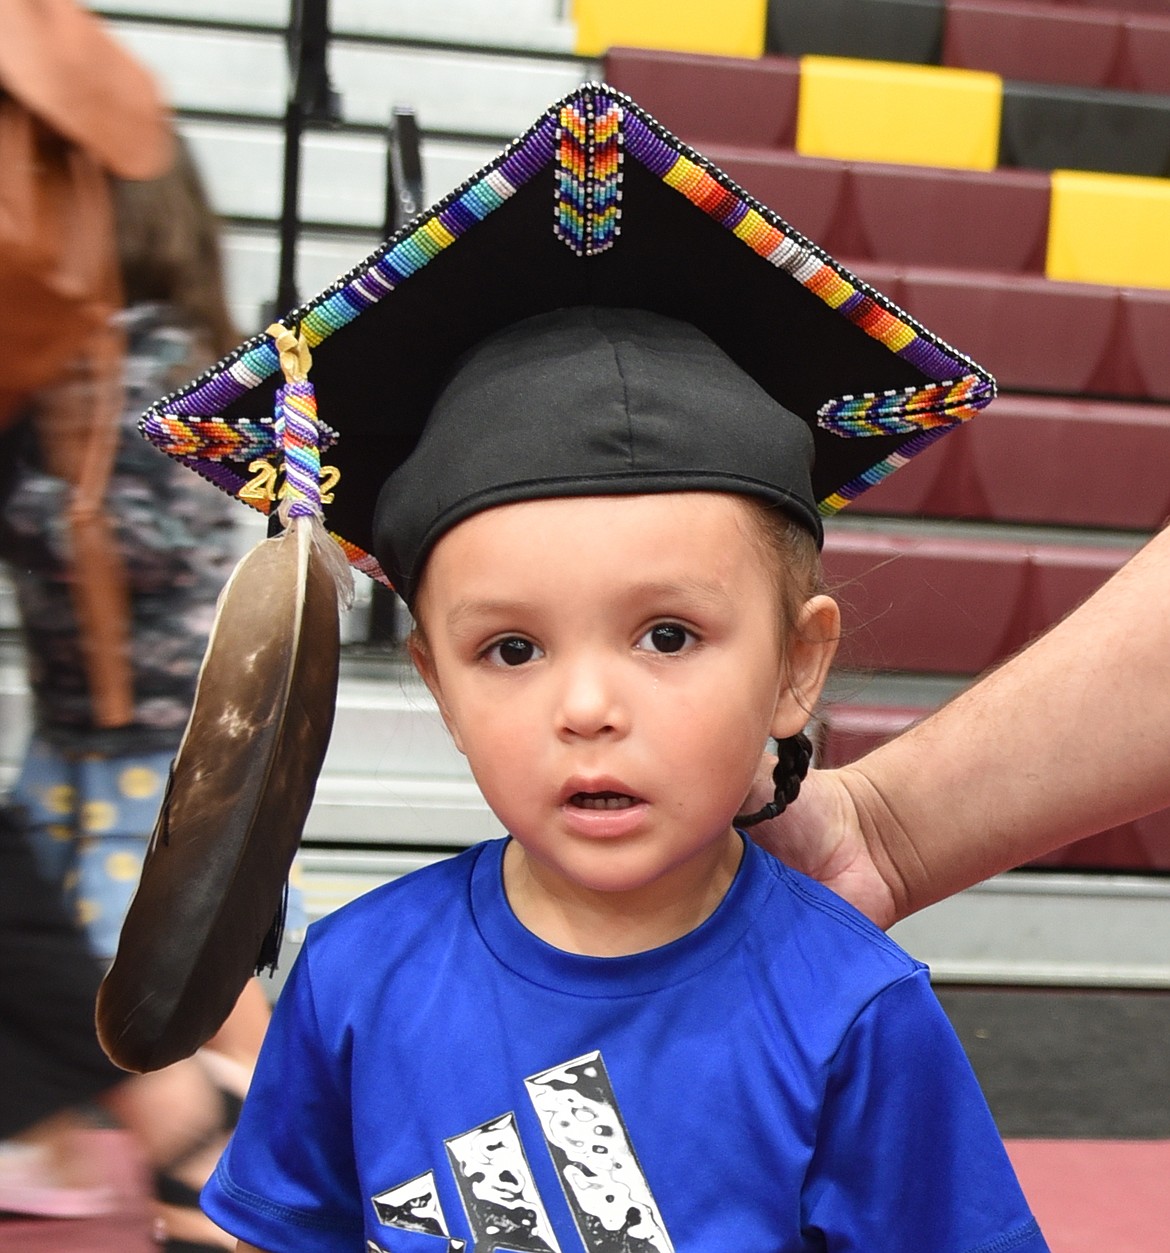 Lakaius Croff dons his father's beaded mortar board. Jalen Croff graduated with a Bachelor of Arts in Business Administration. (Marla Hall photo)